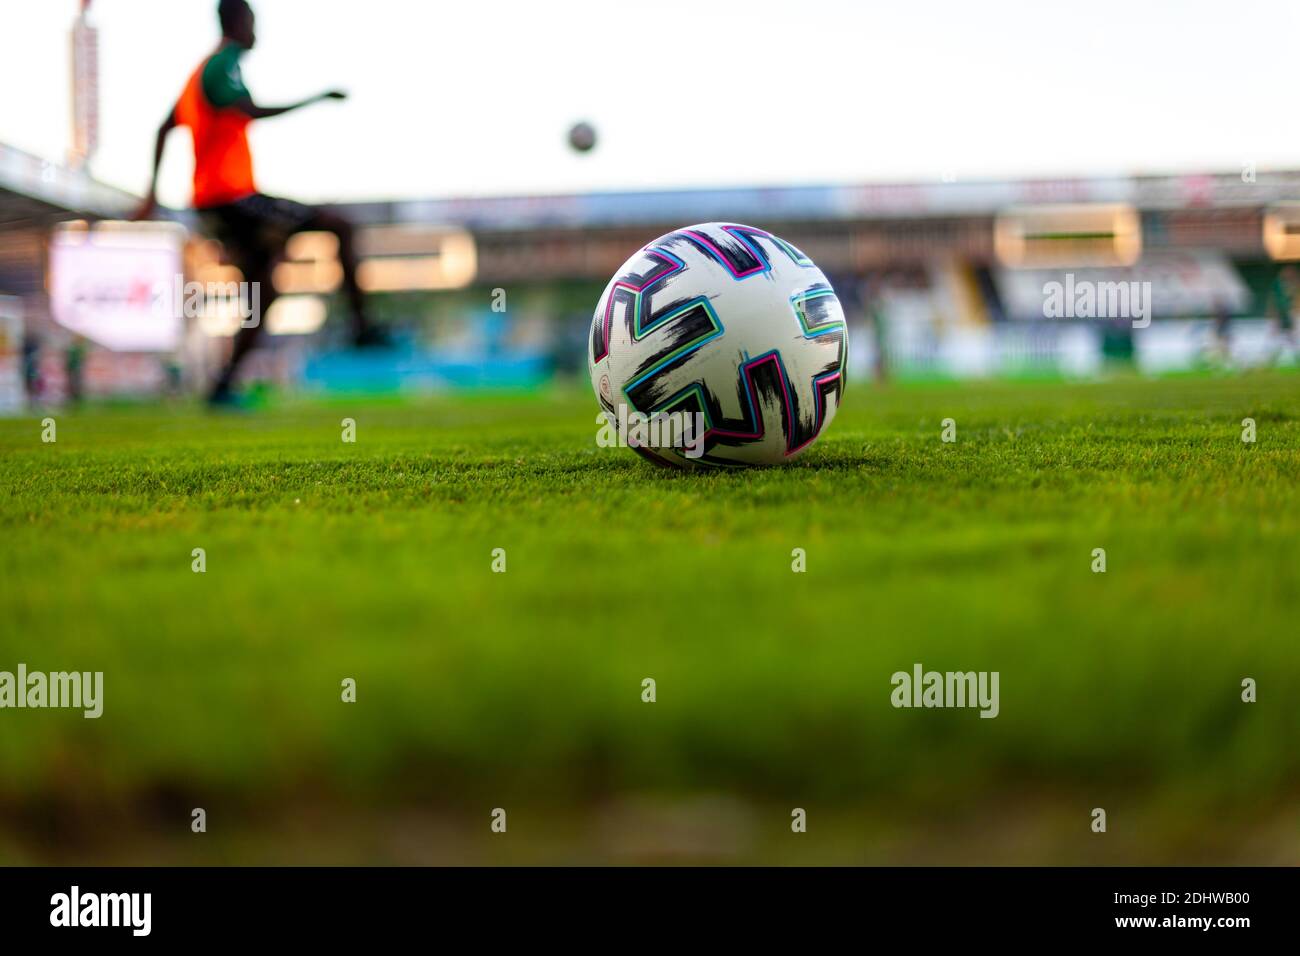 Ried, Austria - 31 July, 2020. official football ball Stock Photo